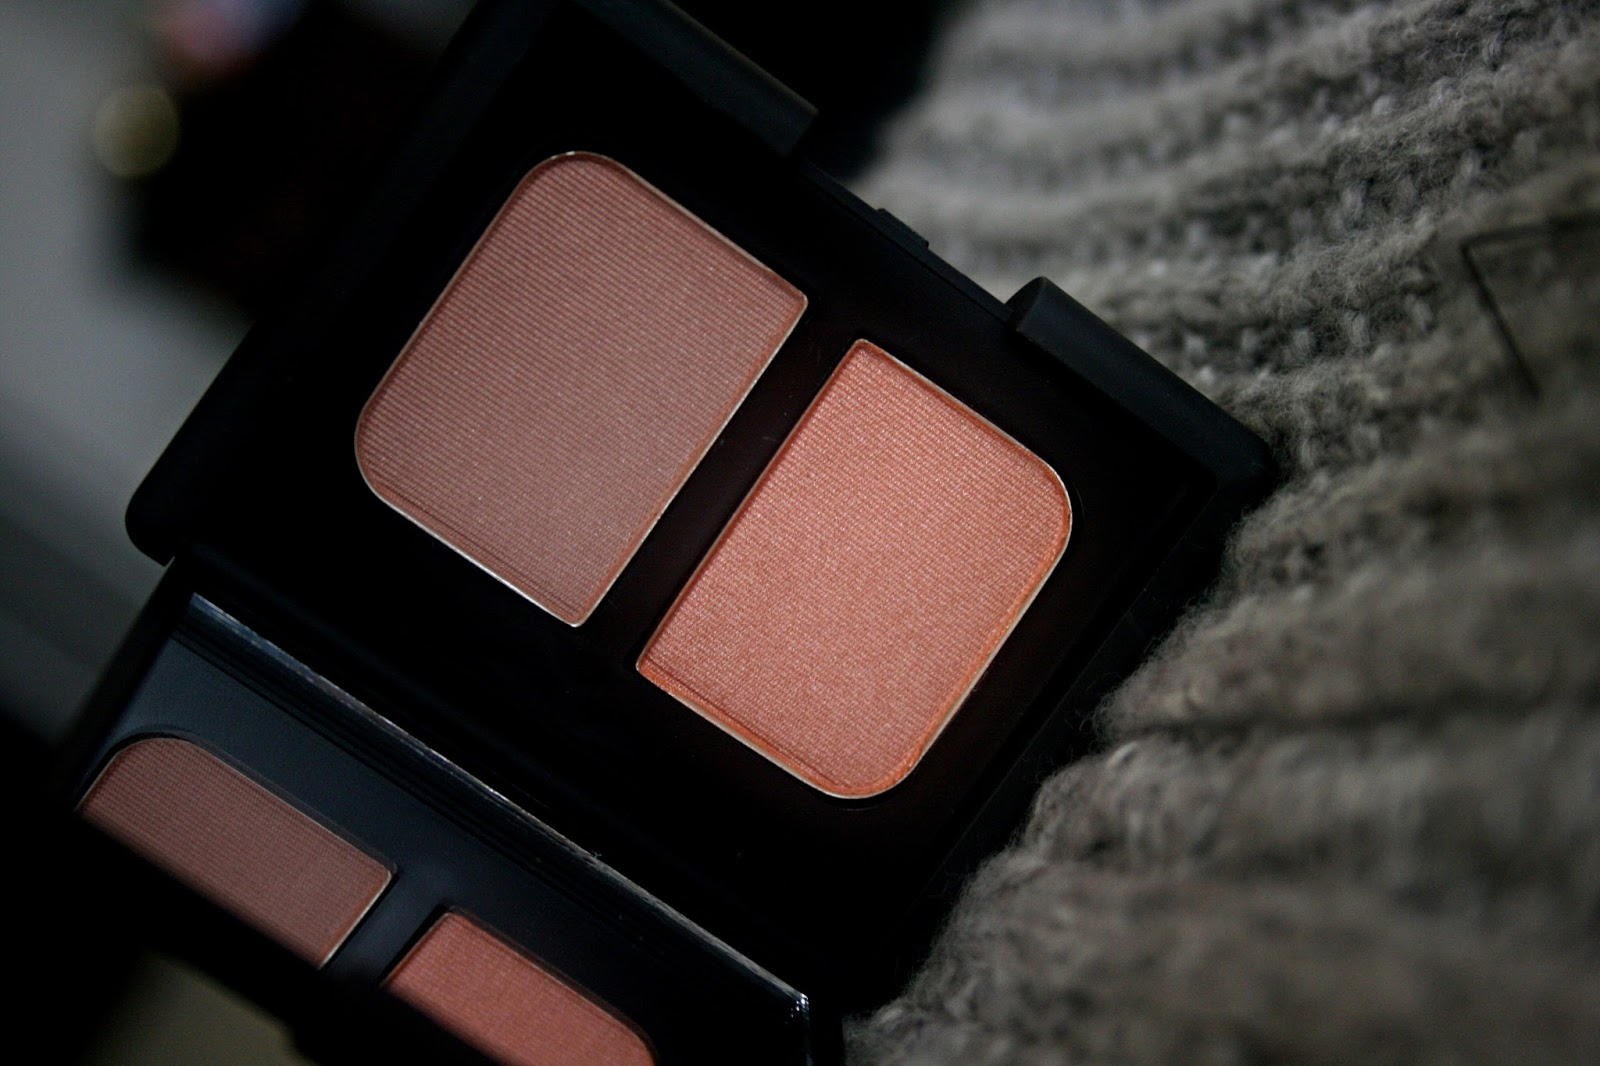 NARS Valhalla Shimmer Eye Shadow and St-Paul-De-Vence Eyeshadow Duo NARS Spring 2015 Collection